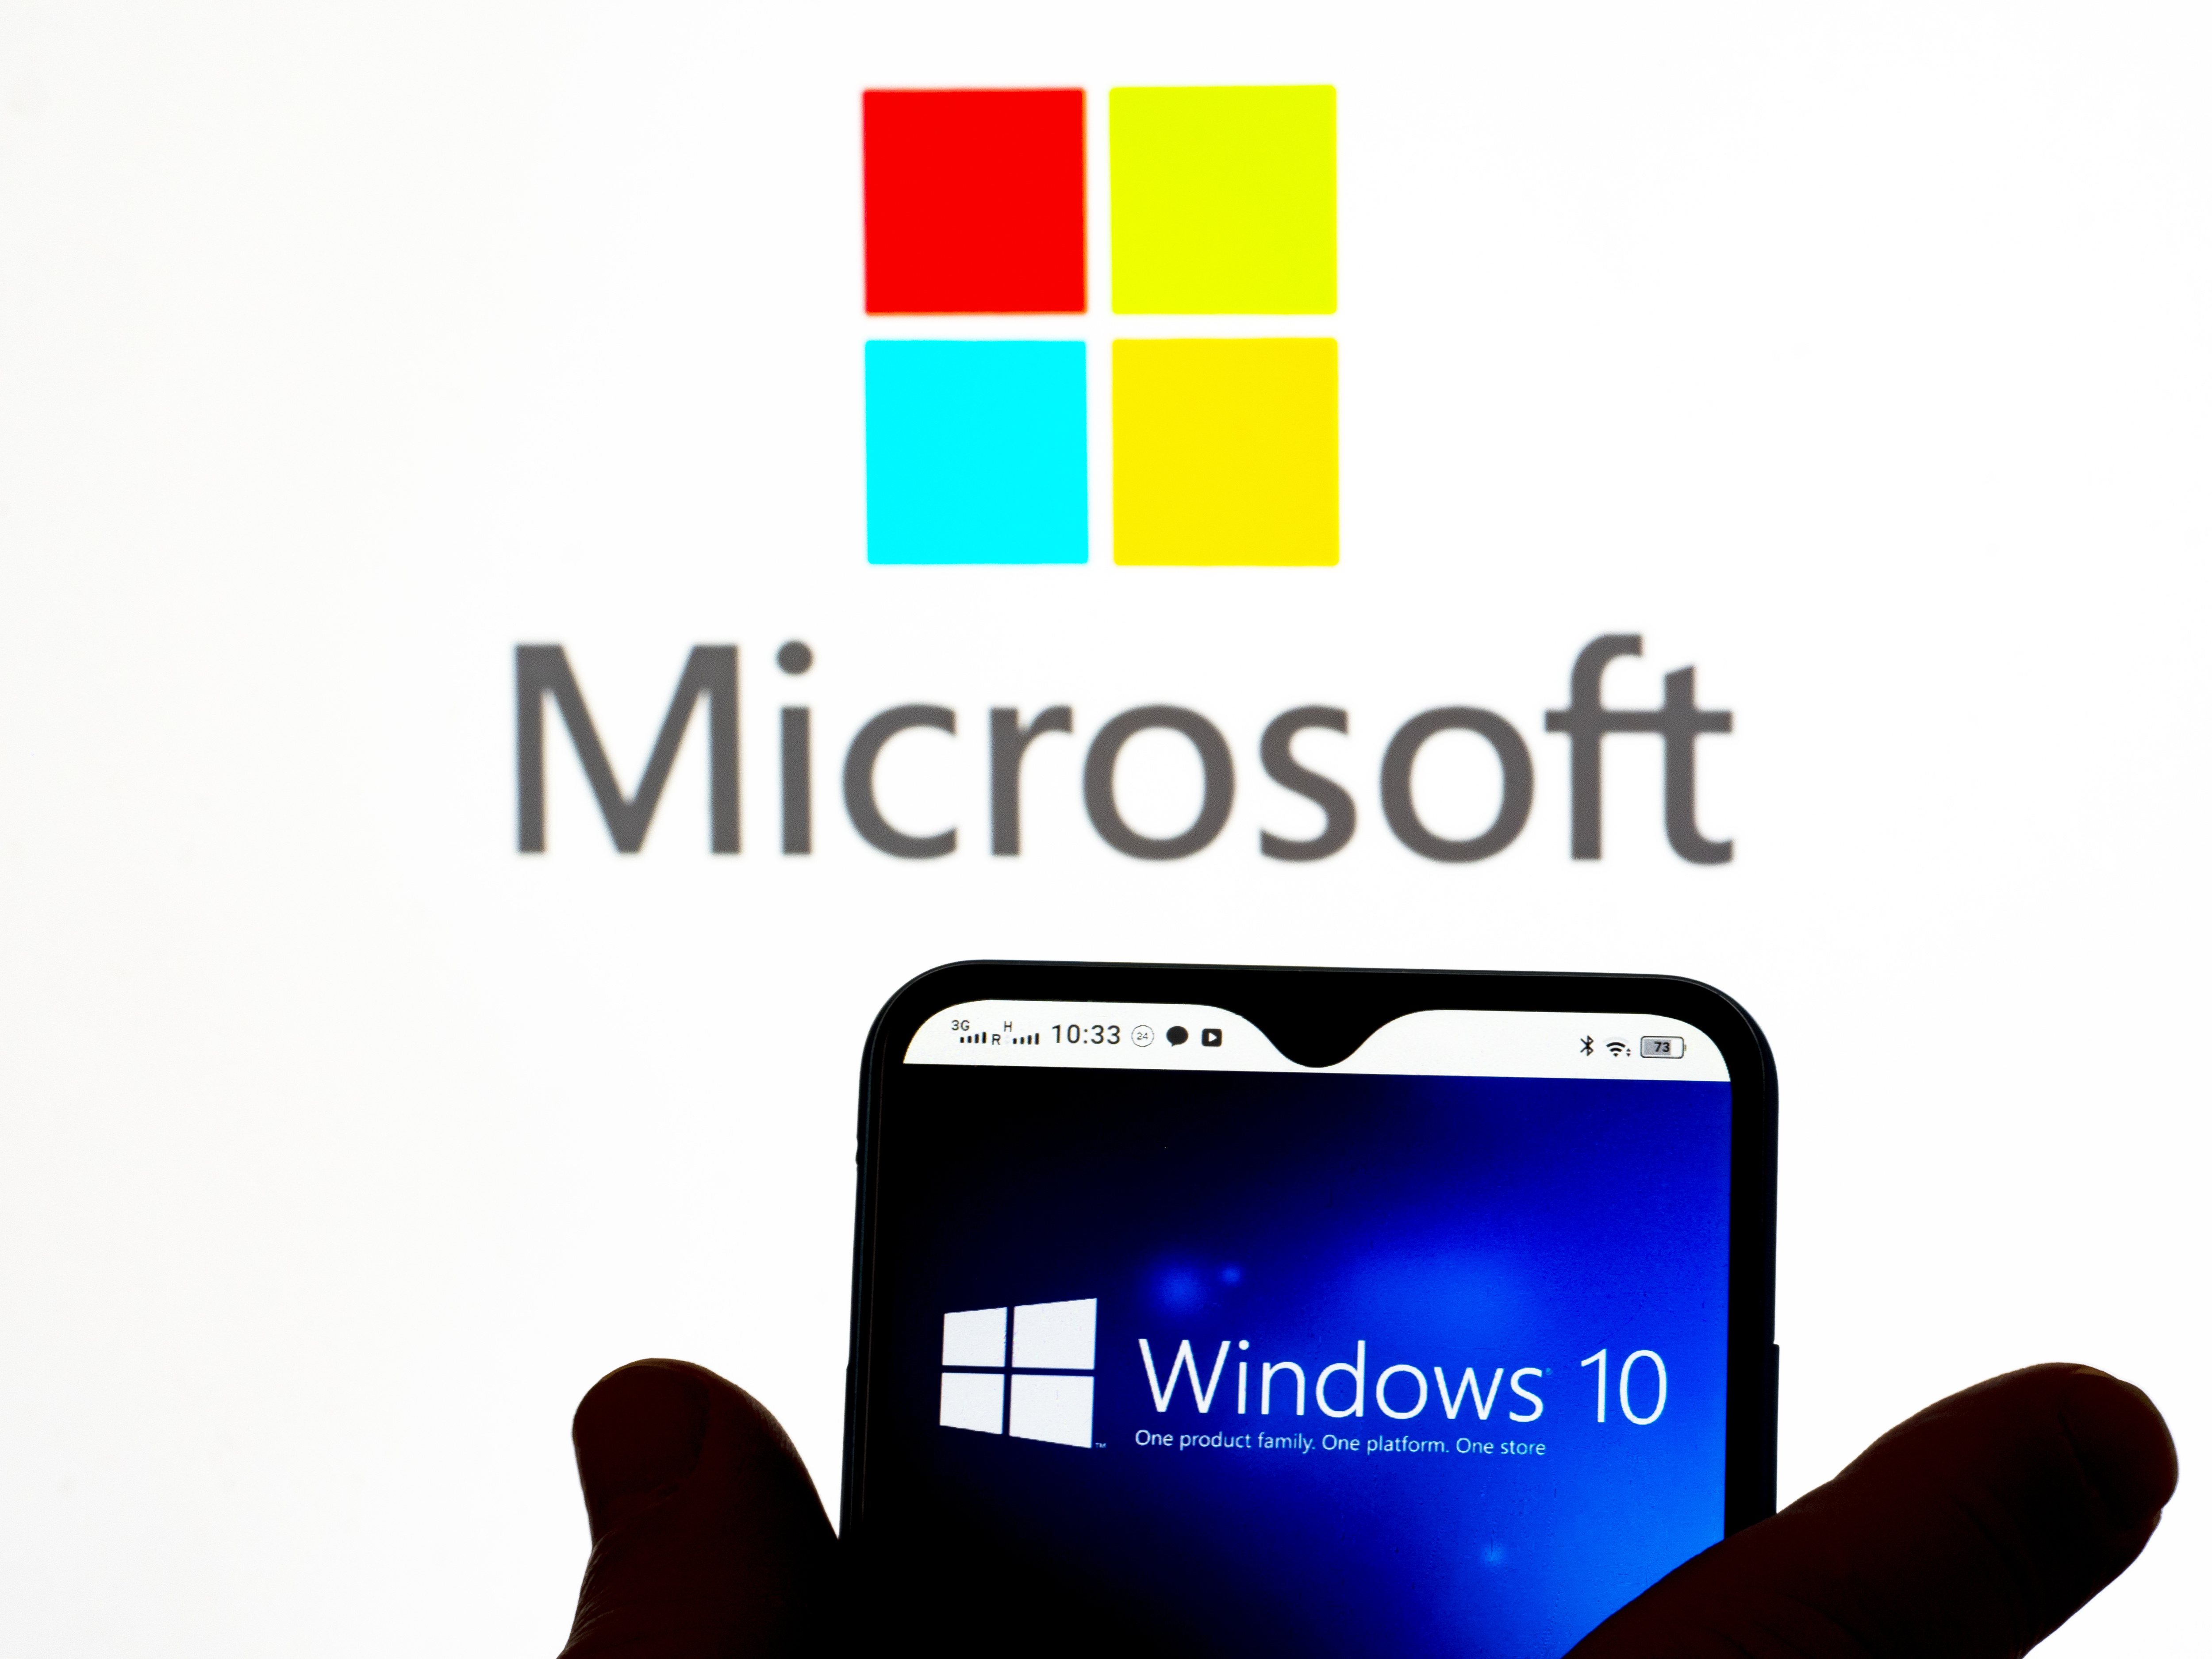 Windows 10 logo displayed on a smartphone with Microsoft branding in background